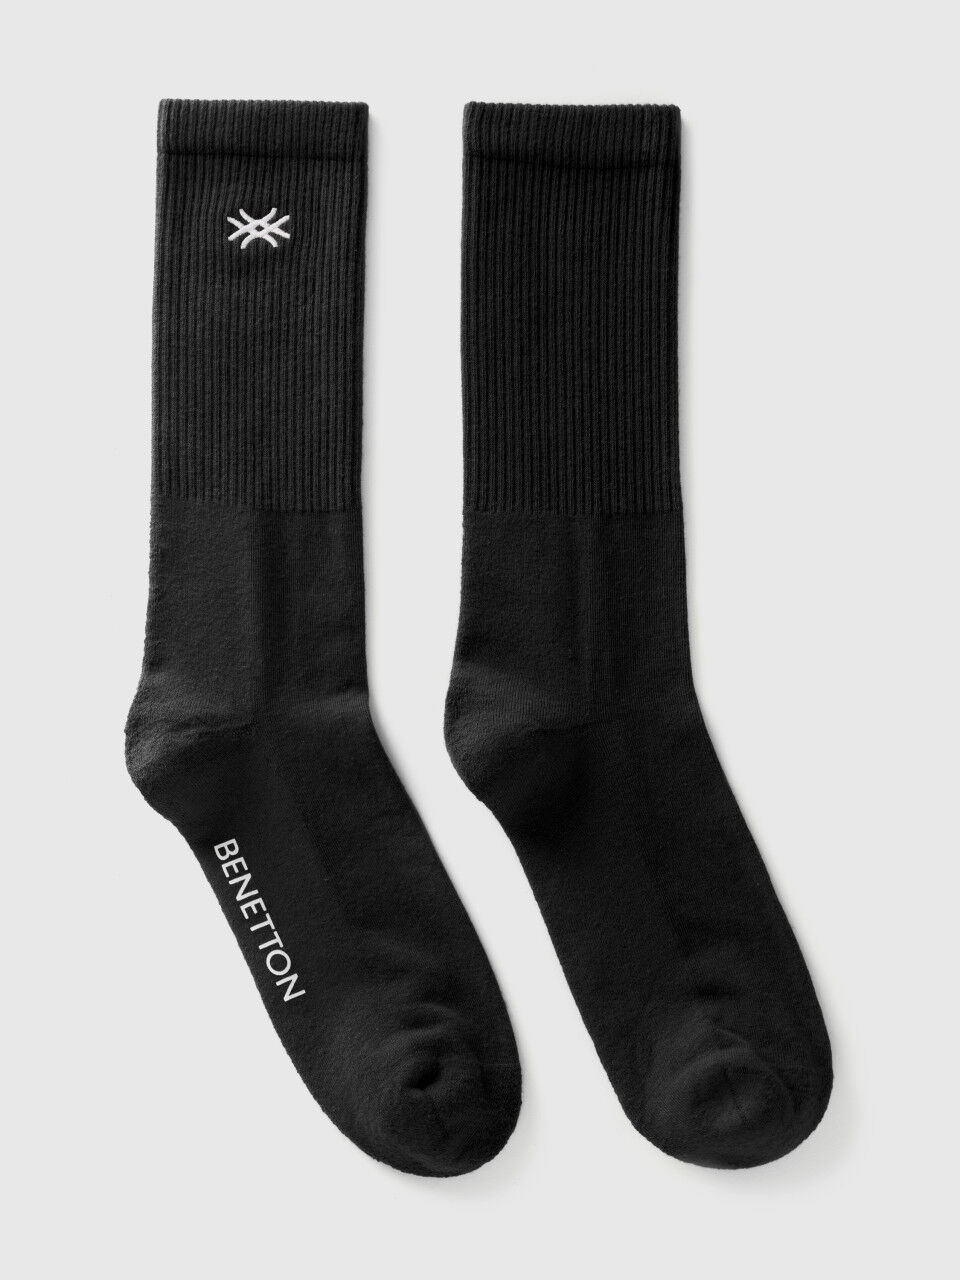 Socks with embroidered logo